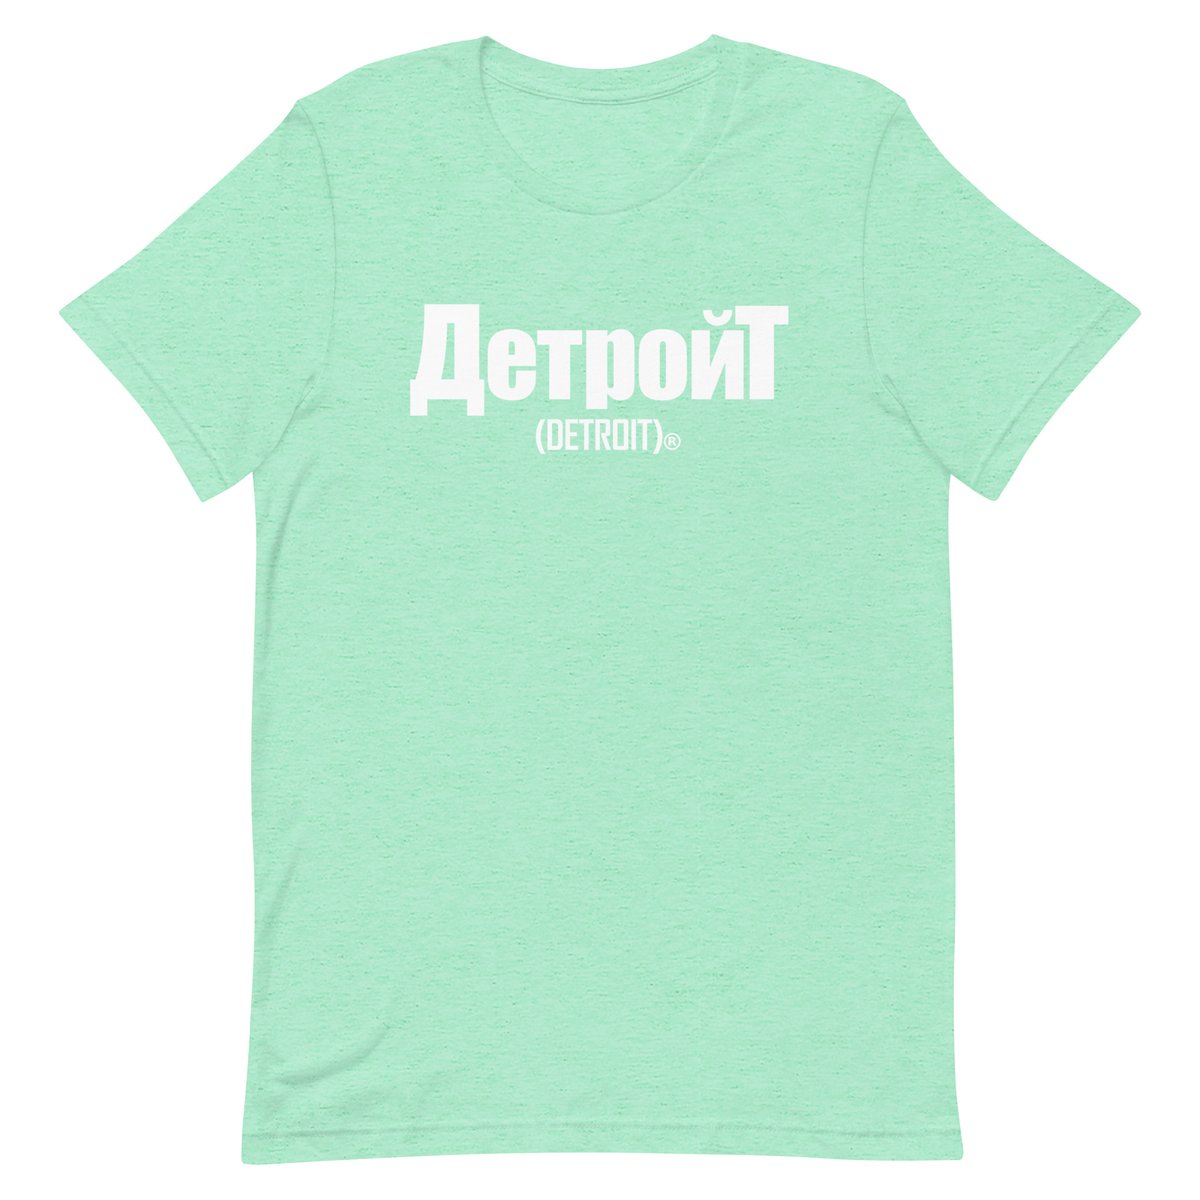 Image of Детройт Detroit Tee (Cool-pack colors)